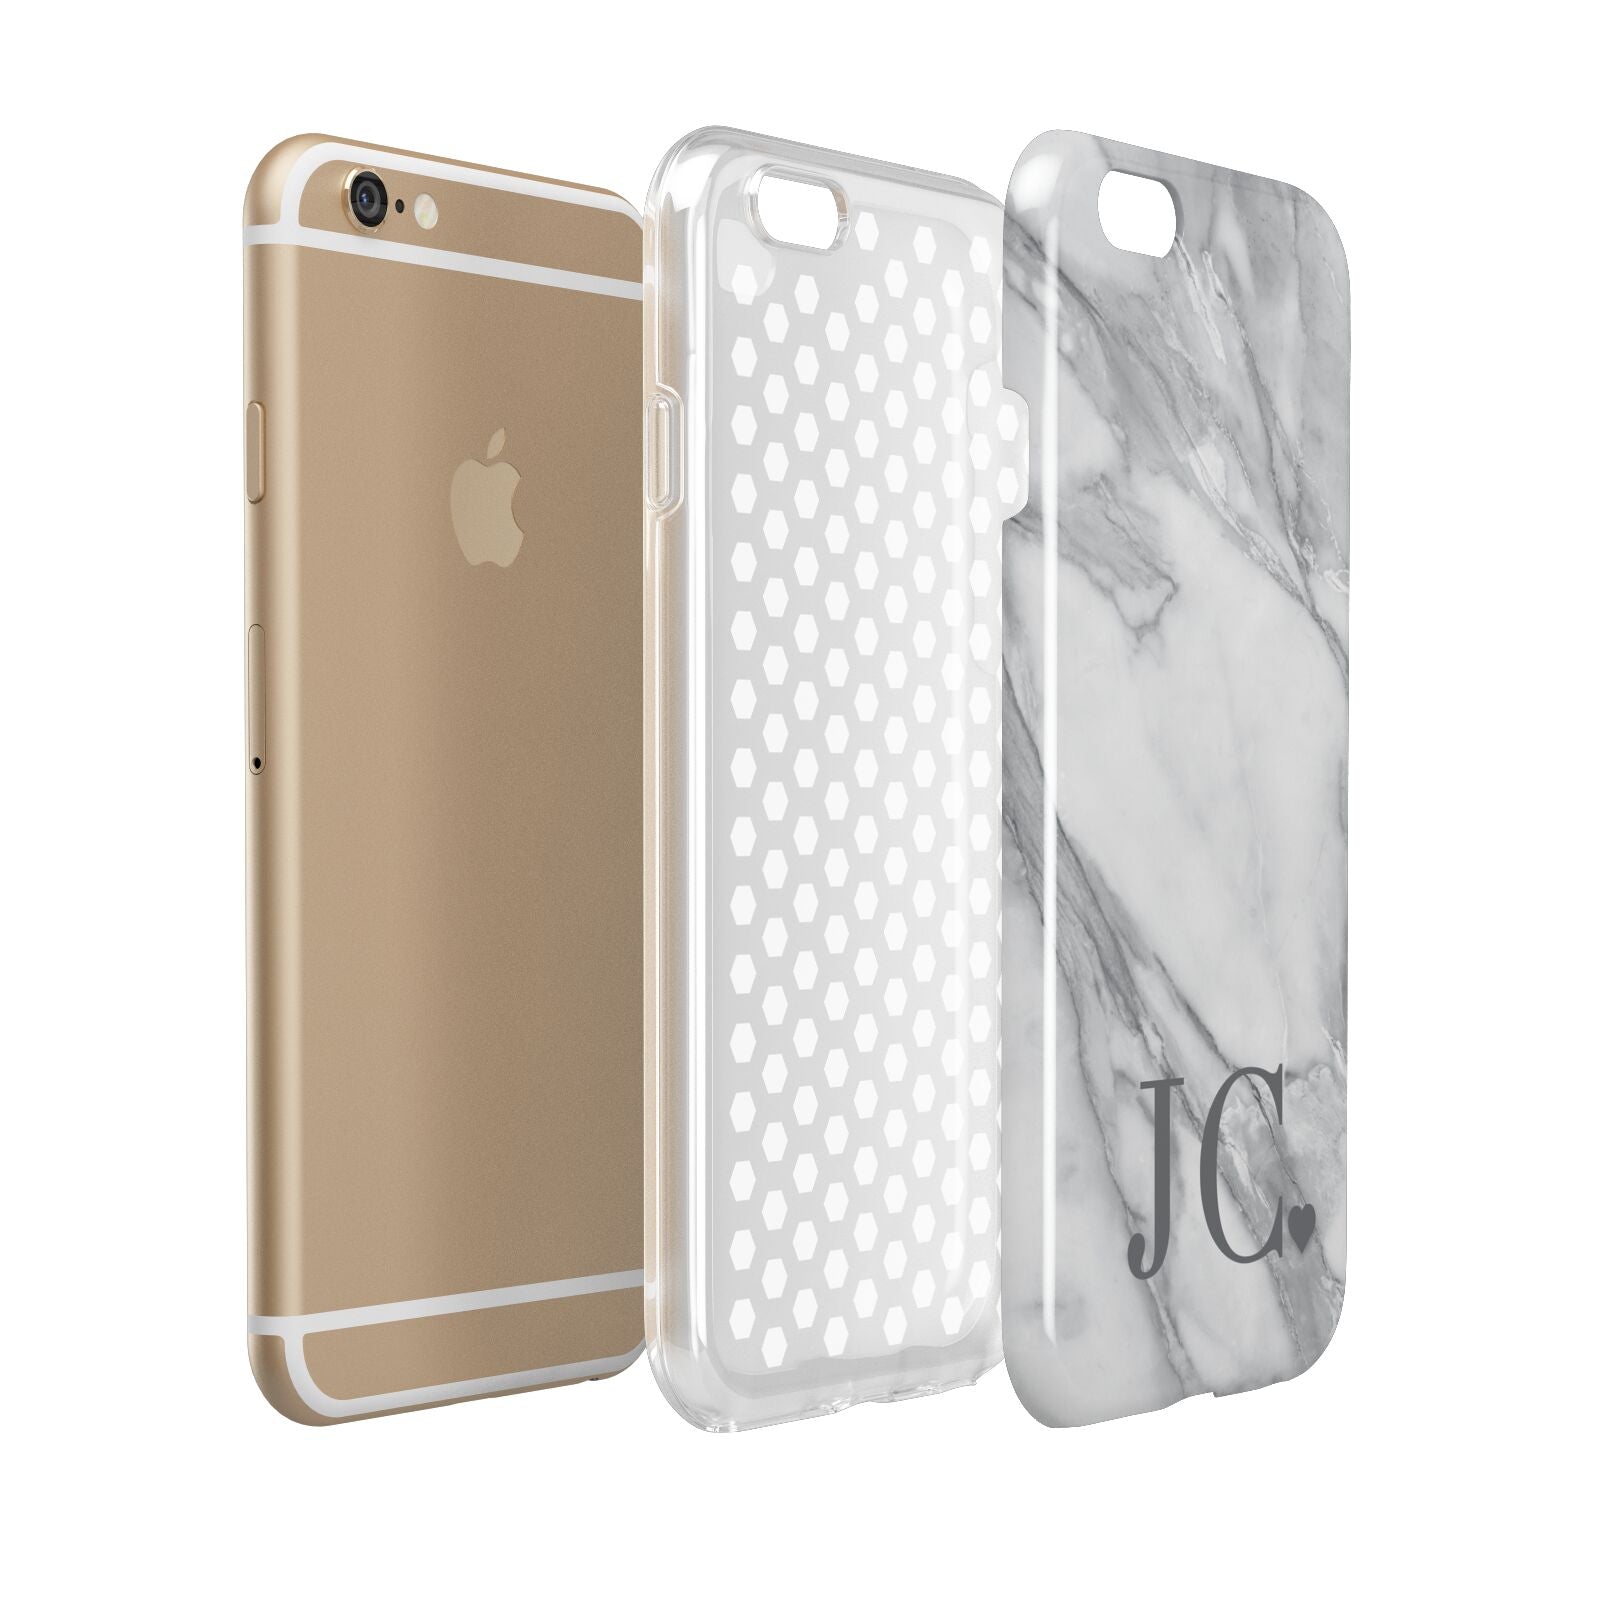 Initials Love Heart Apple iPhone 6 3D Tough Case Expanded view